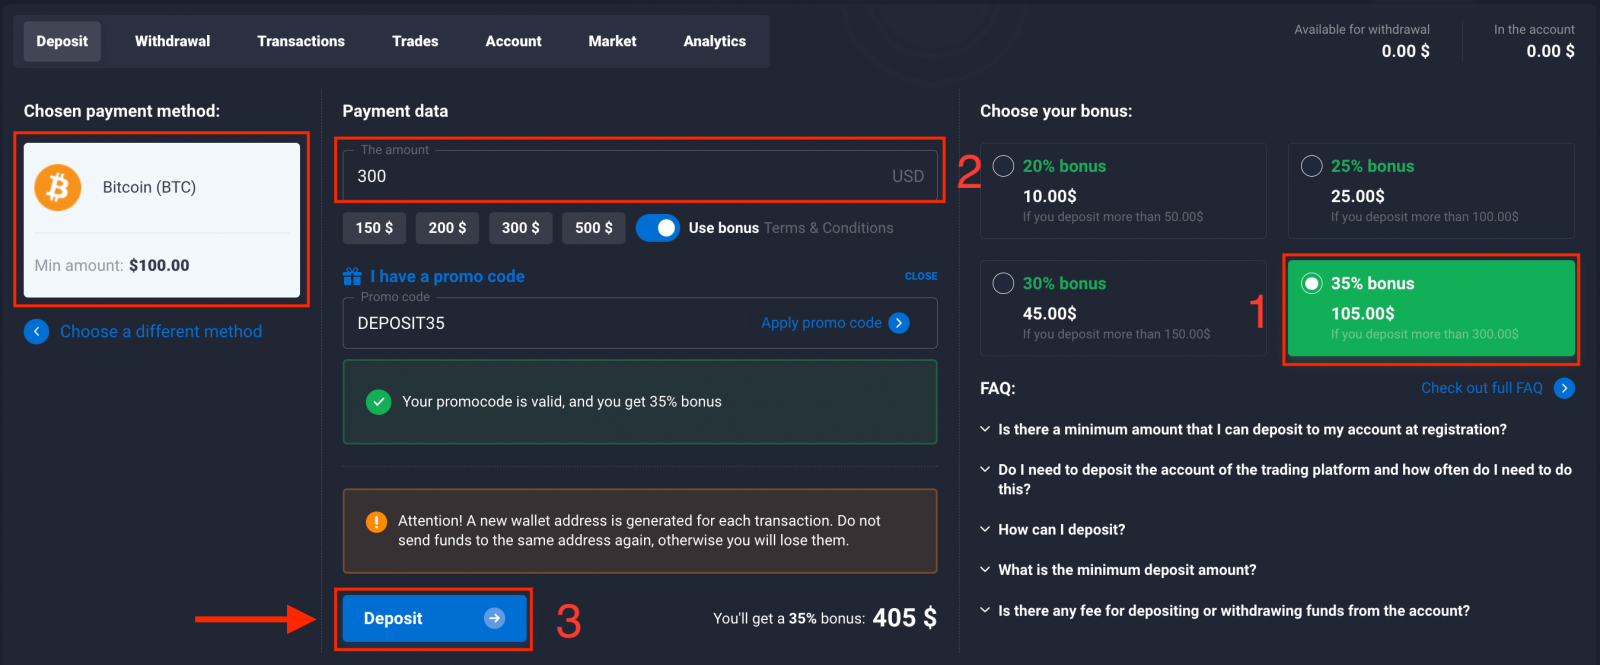 How to Deposit and Trade Digital Options at Quotex